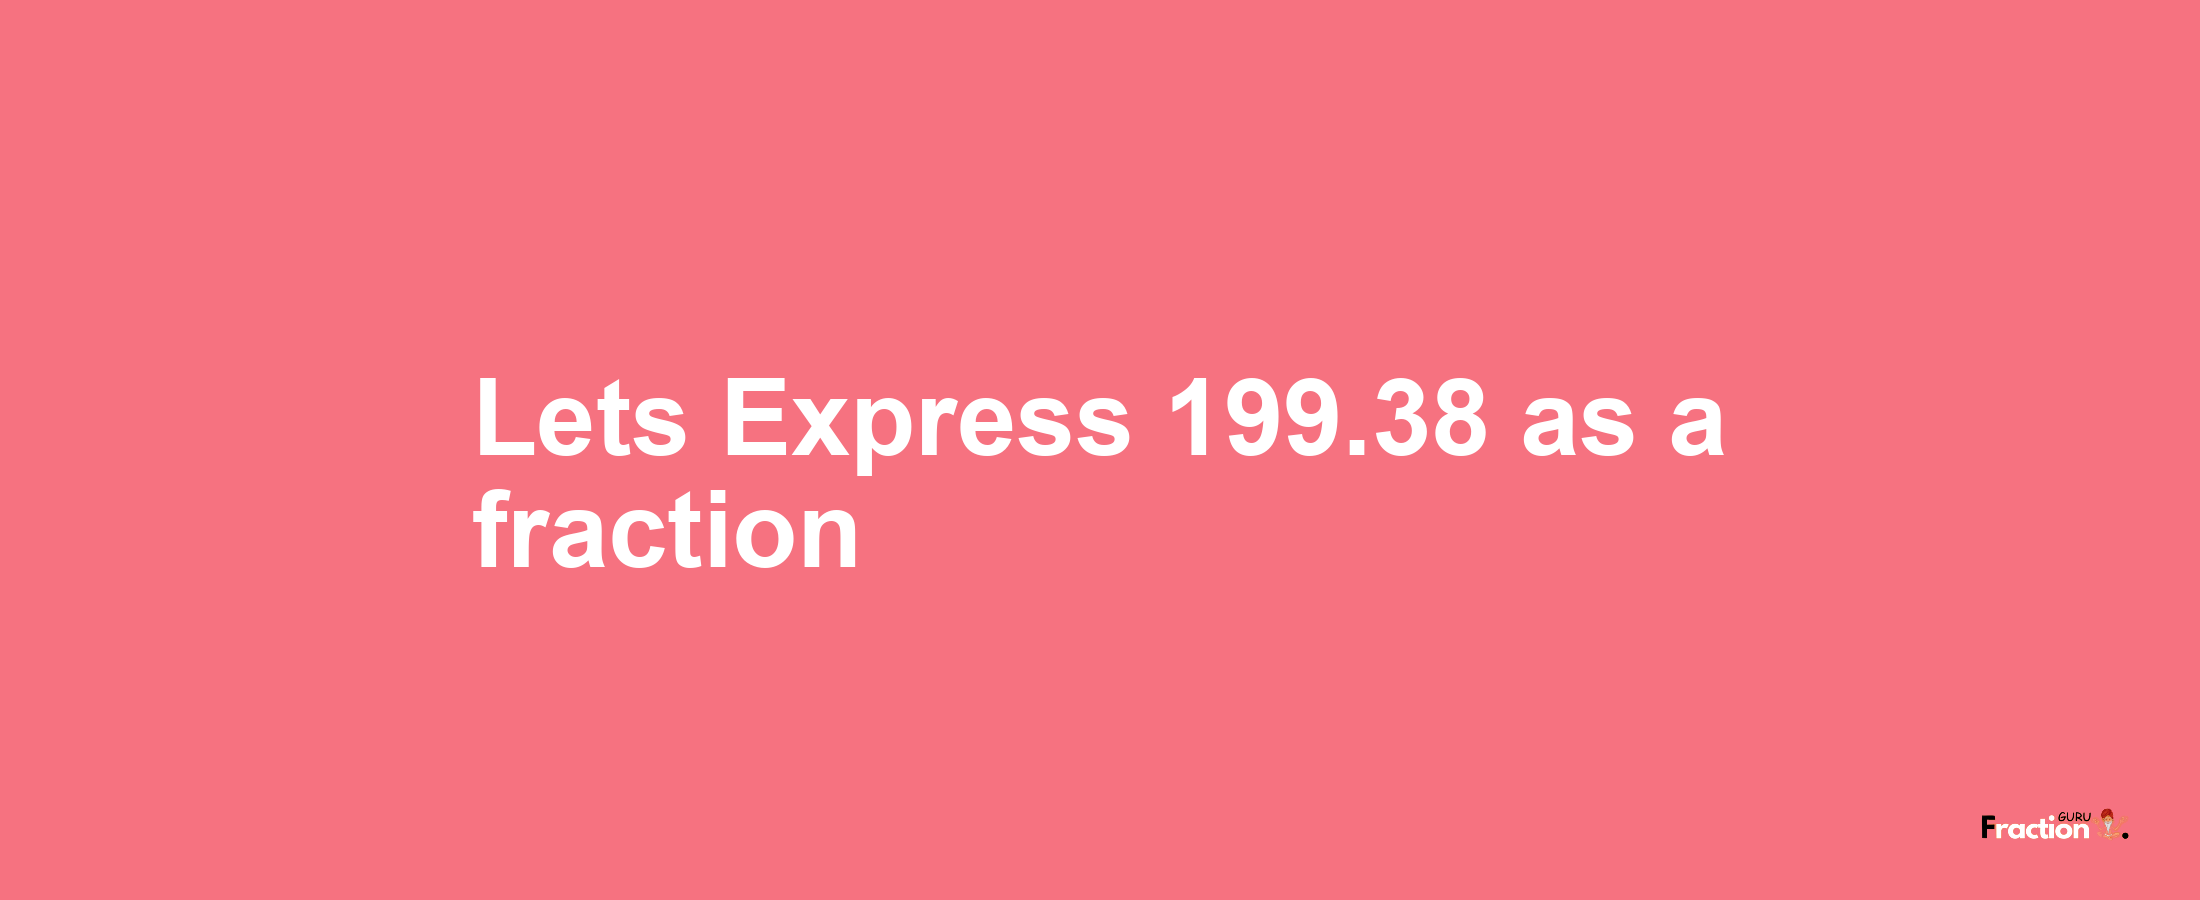 Lets Express 199.38 as afraction